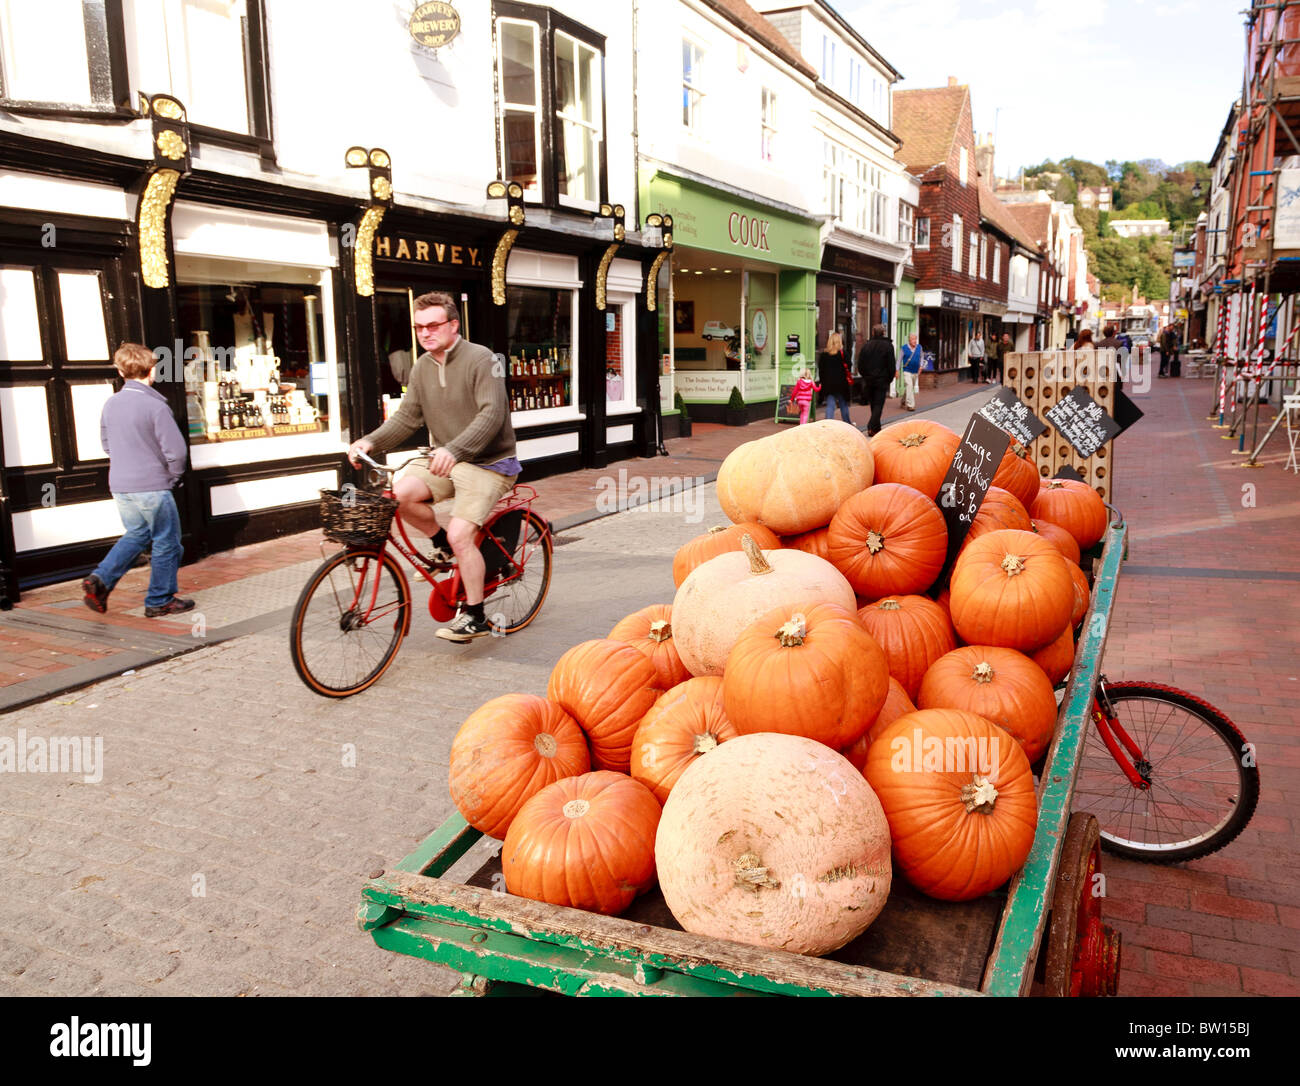 Street scene in Cliffe High Street Lewes, Sussex in Autumn with pumpkins on display Stock Photo